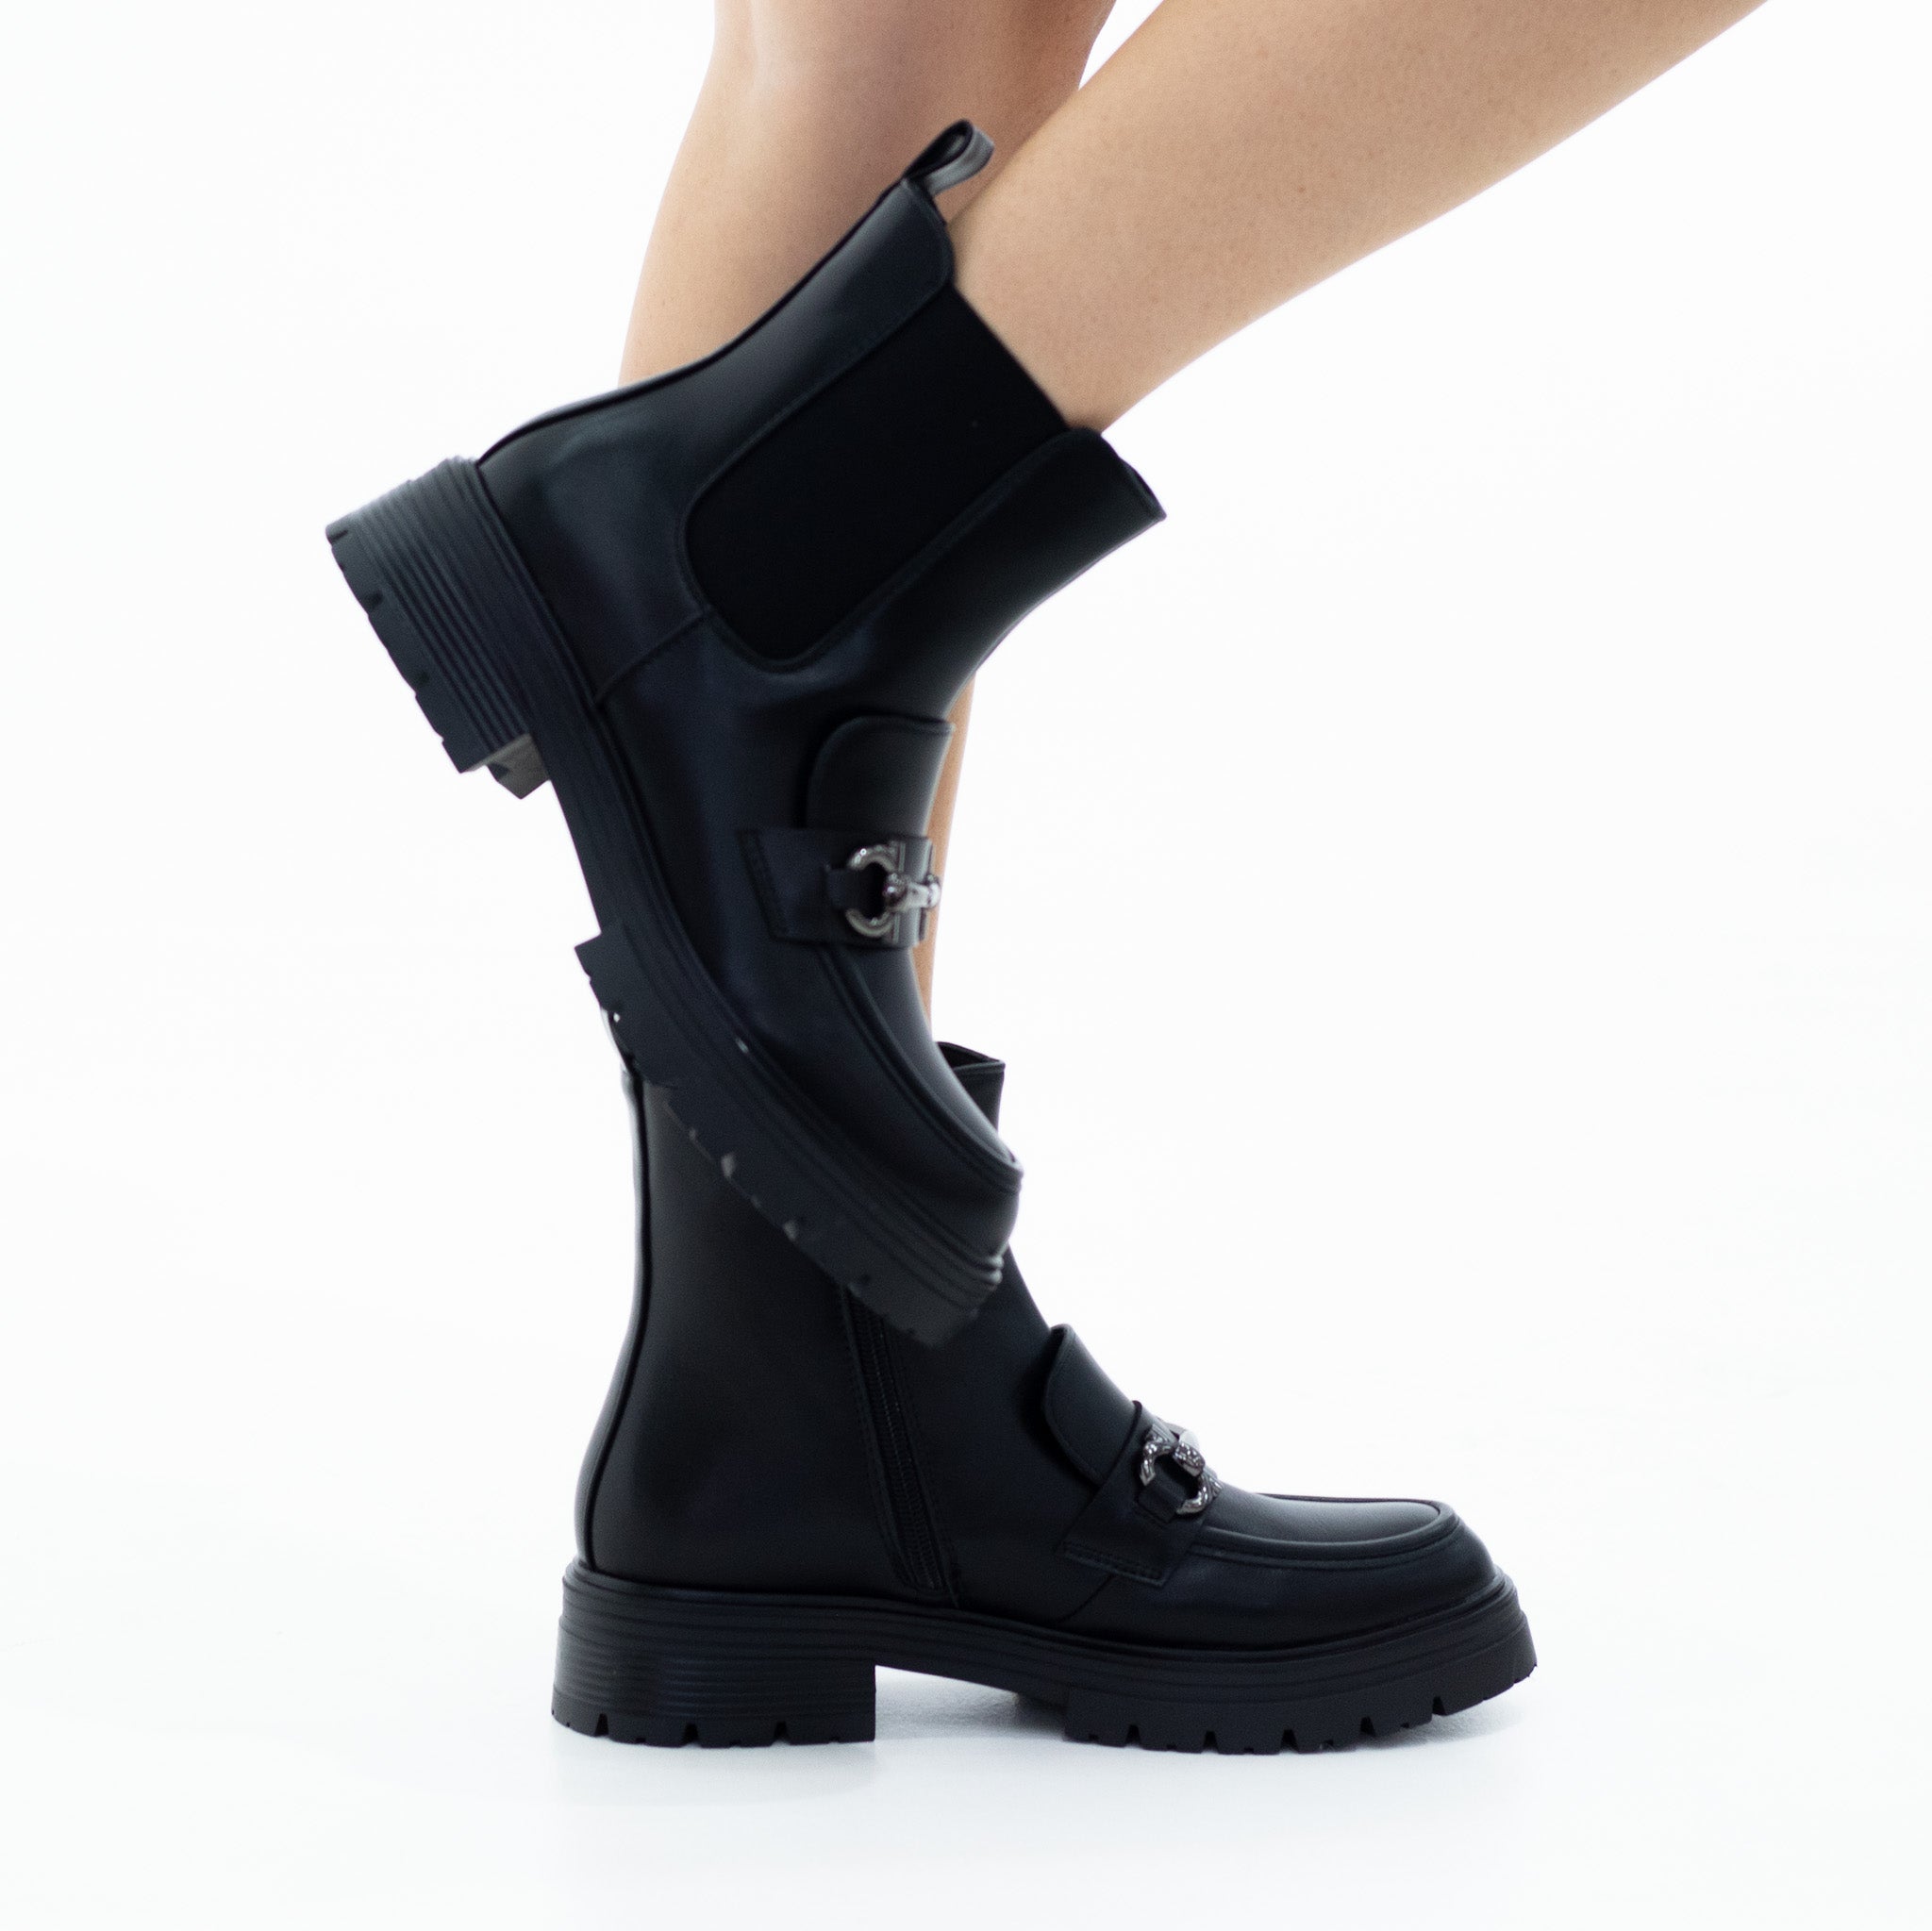 Black 4cm heel chuncky clerated chelse boot with a trim wilea